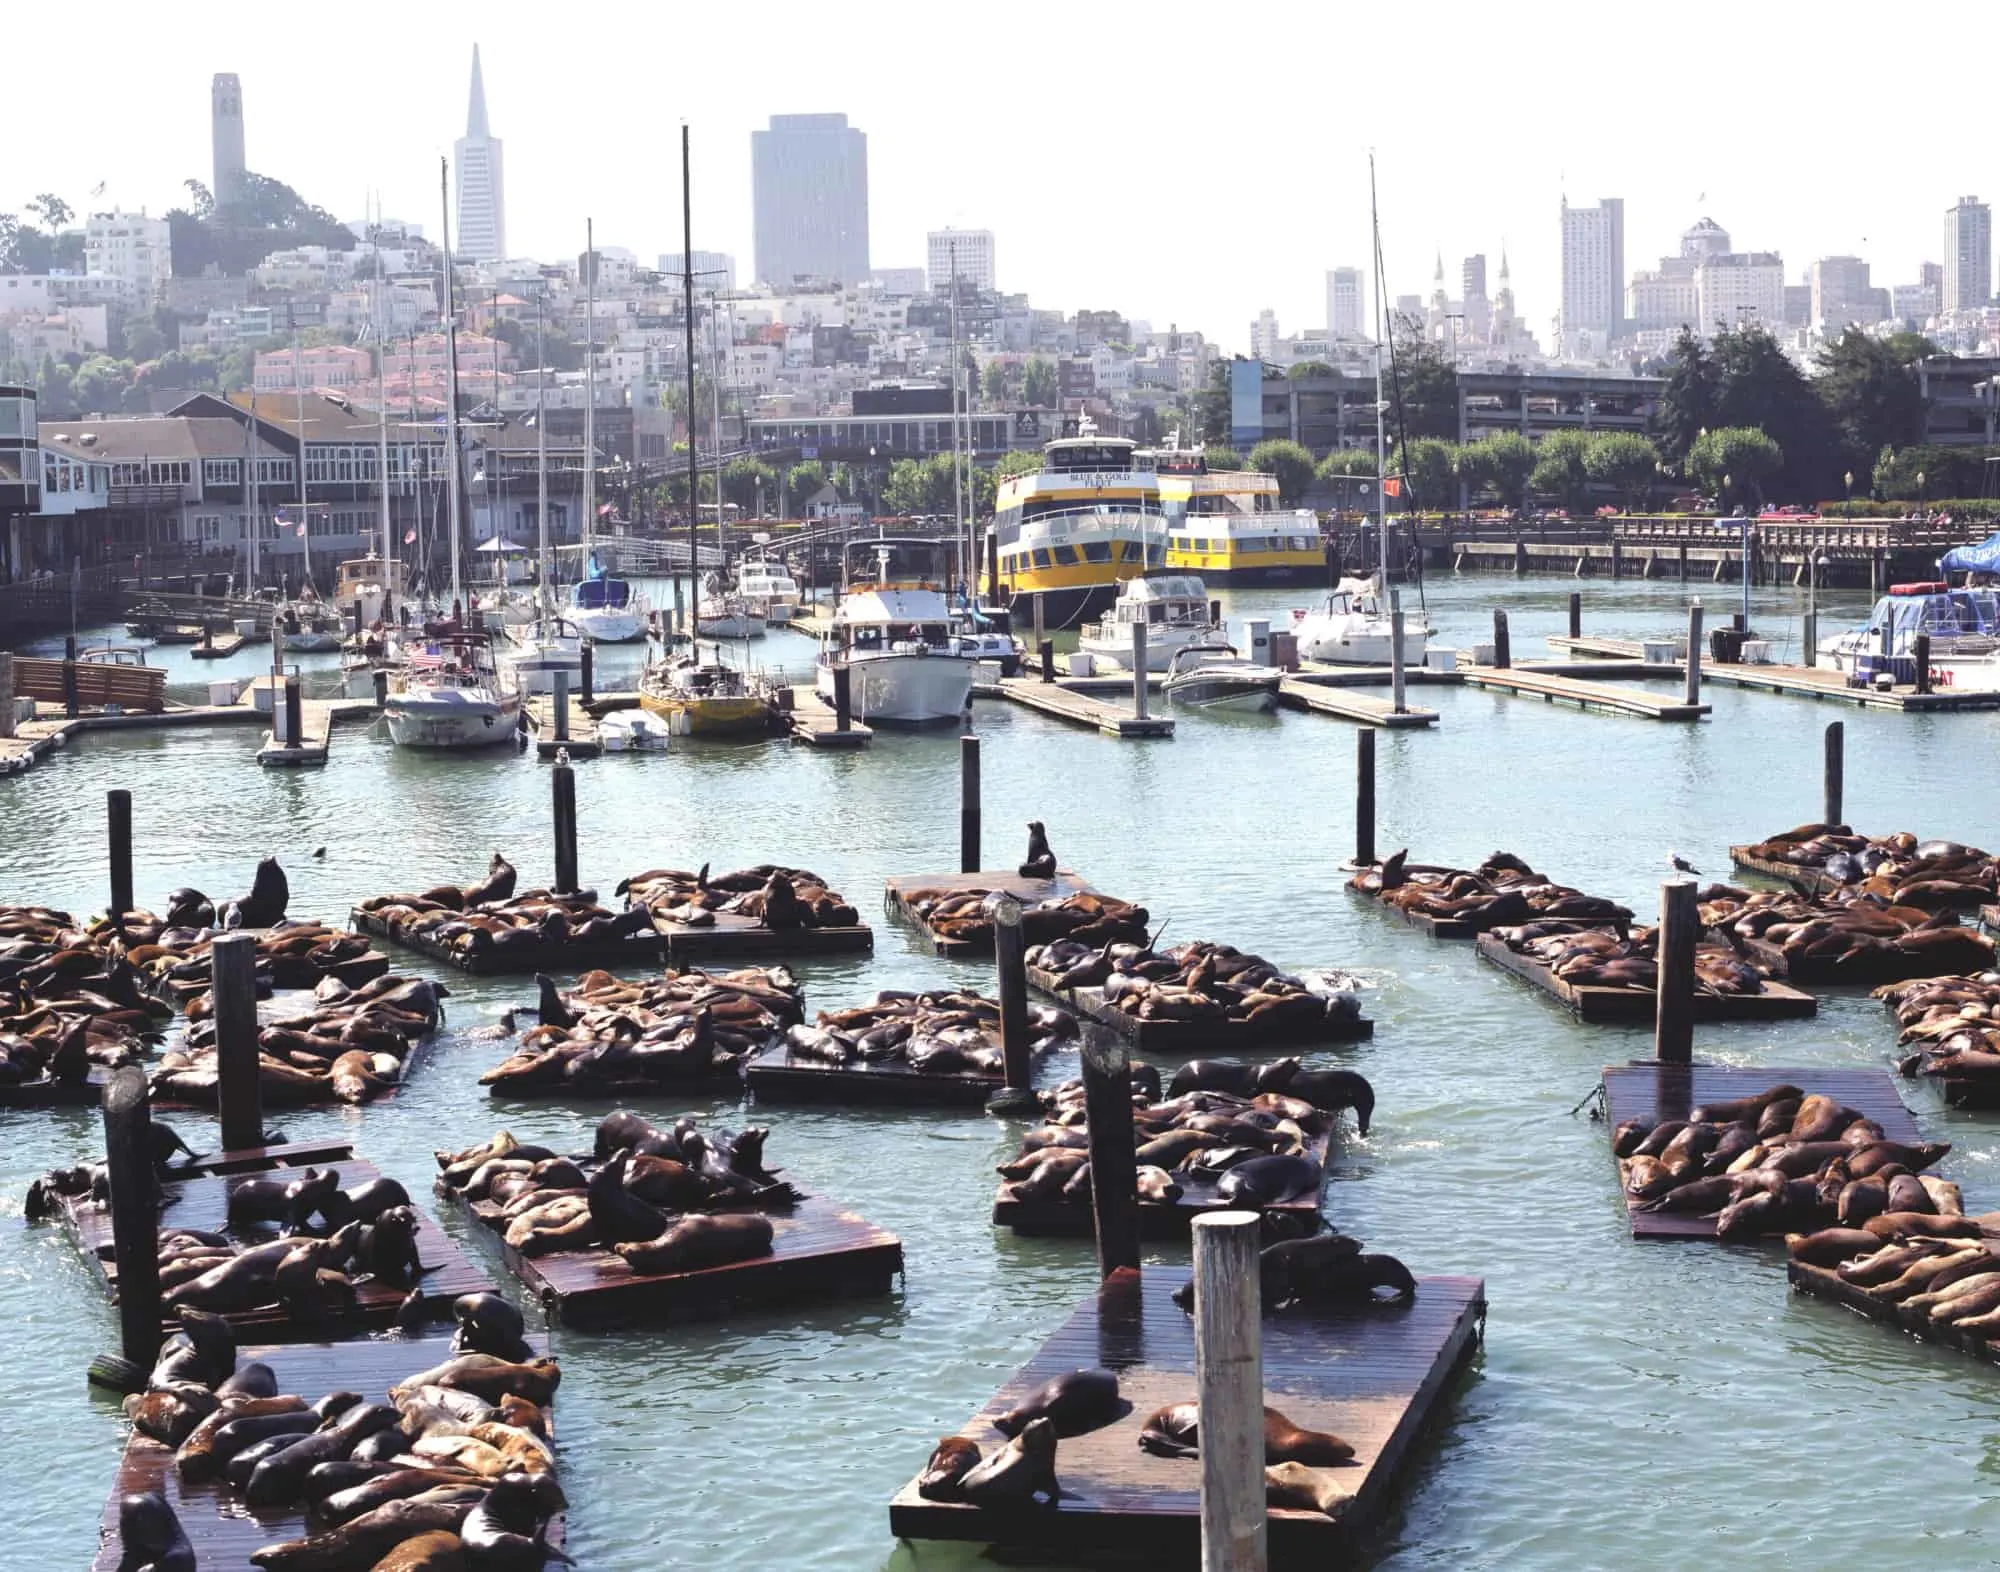 You can't head to San Francisco with kids without a visit to Fisherman's Wharf